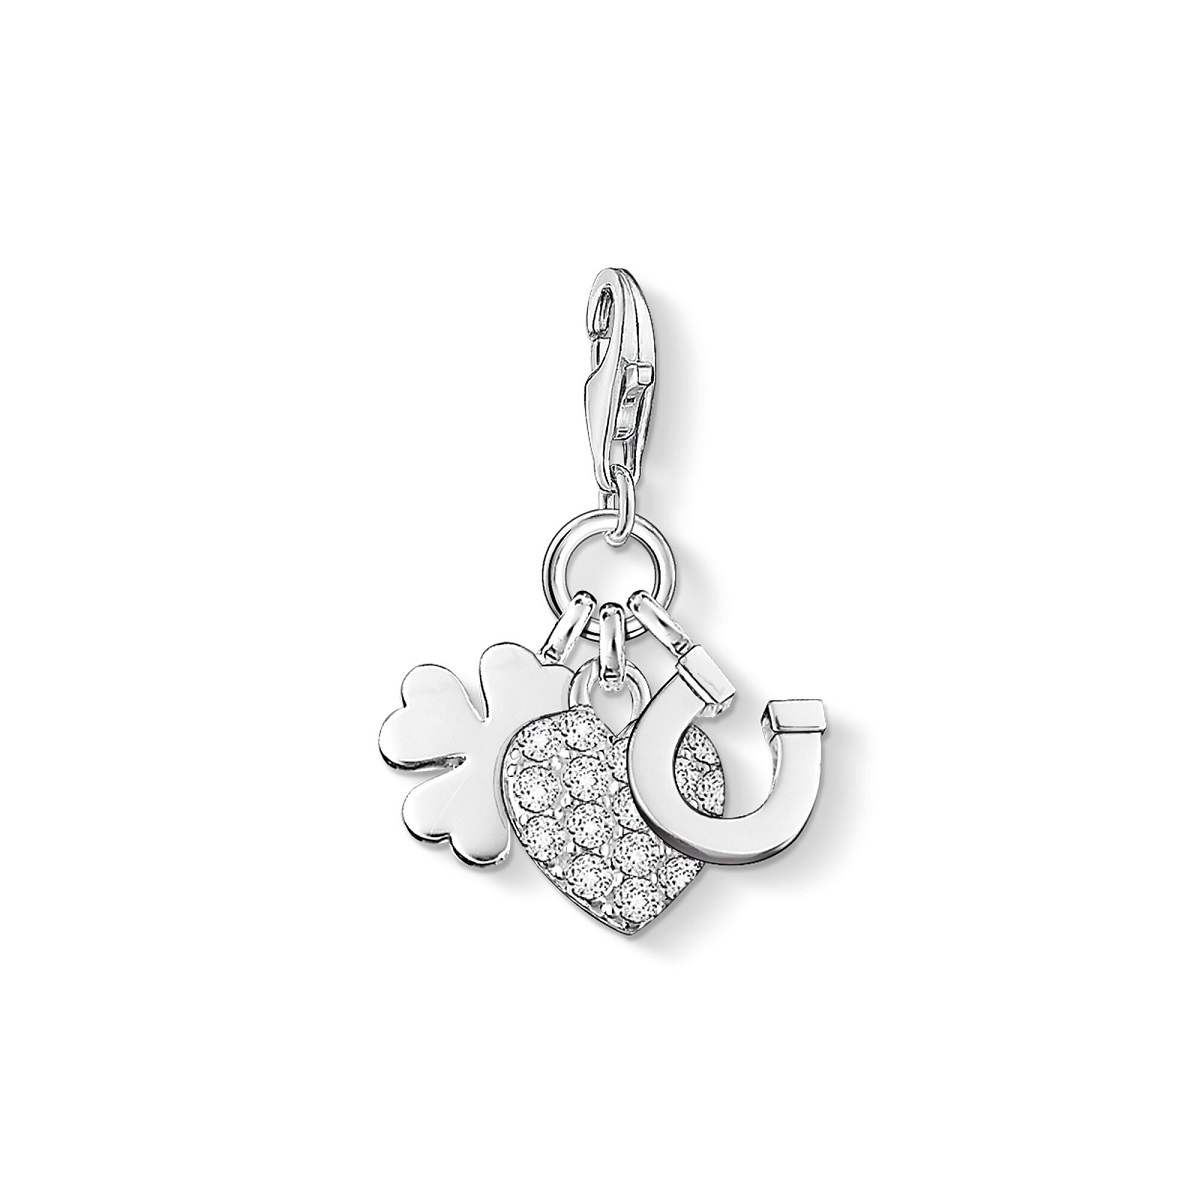 Photos - Other Jewellery Thomas Sabo Charm Pendant - Silver and Zirconia Good Luck 